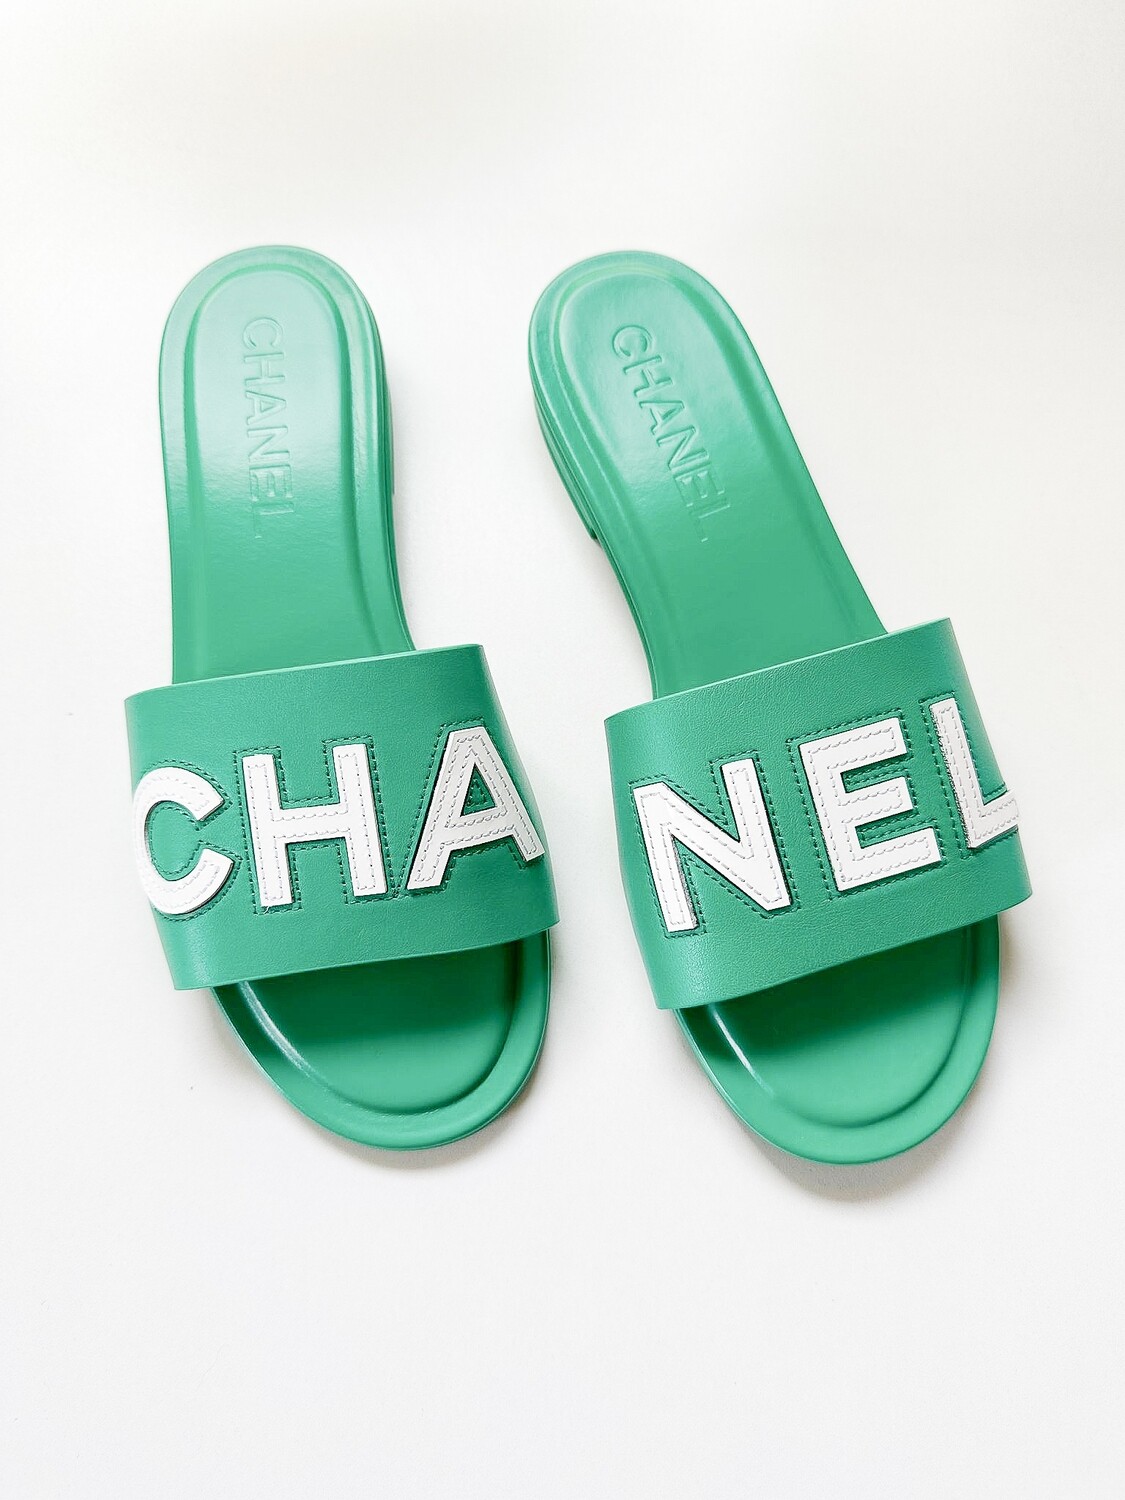 Chanel Slide Sandals, Green and White, Size 38, New in Box MA001